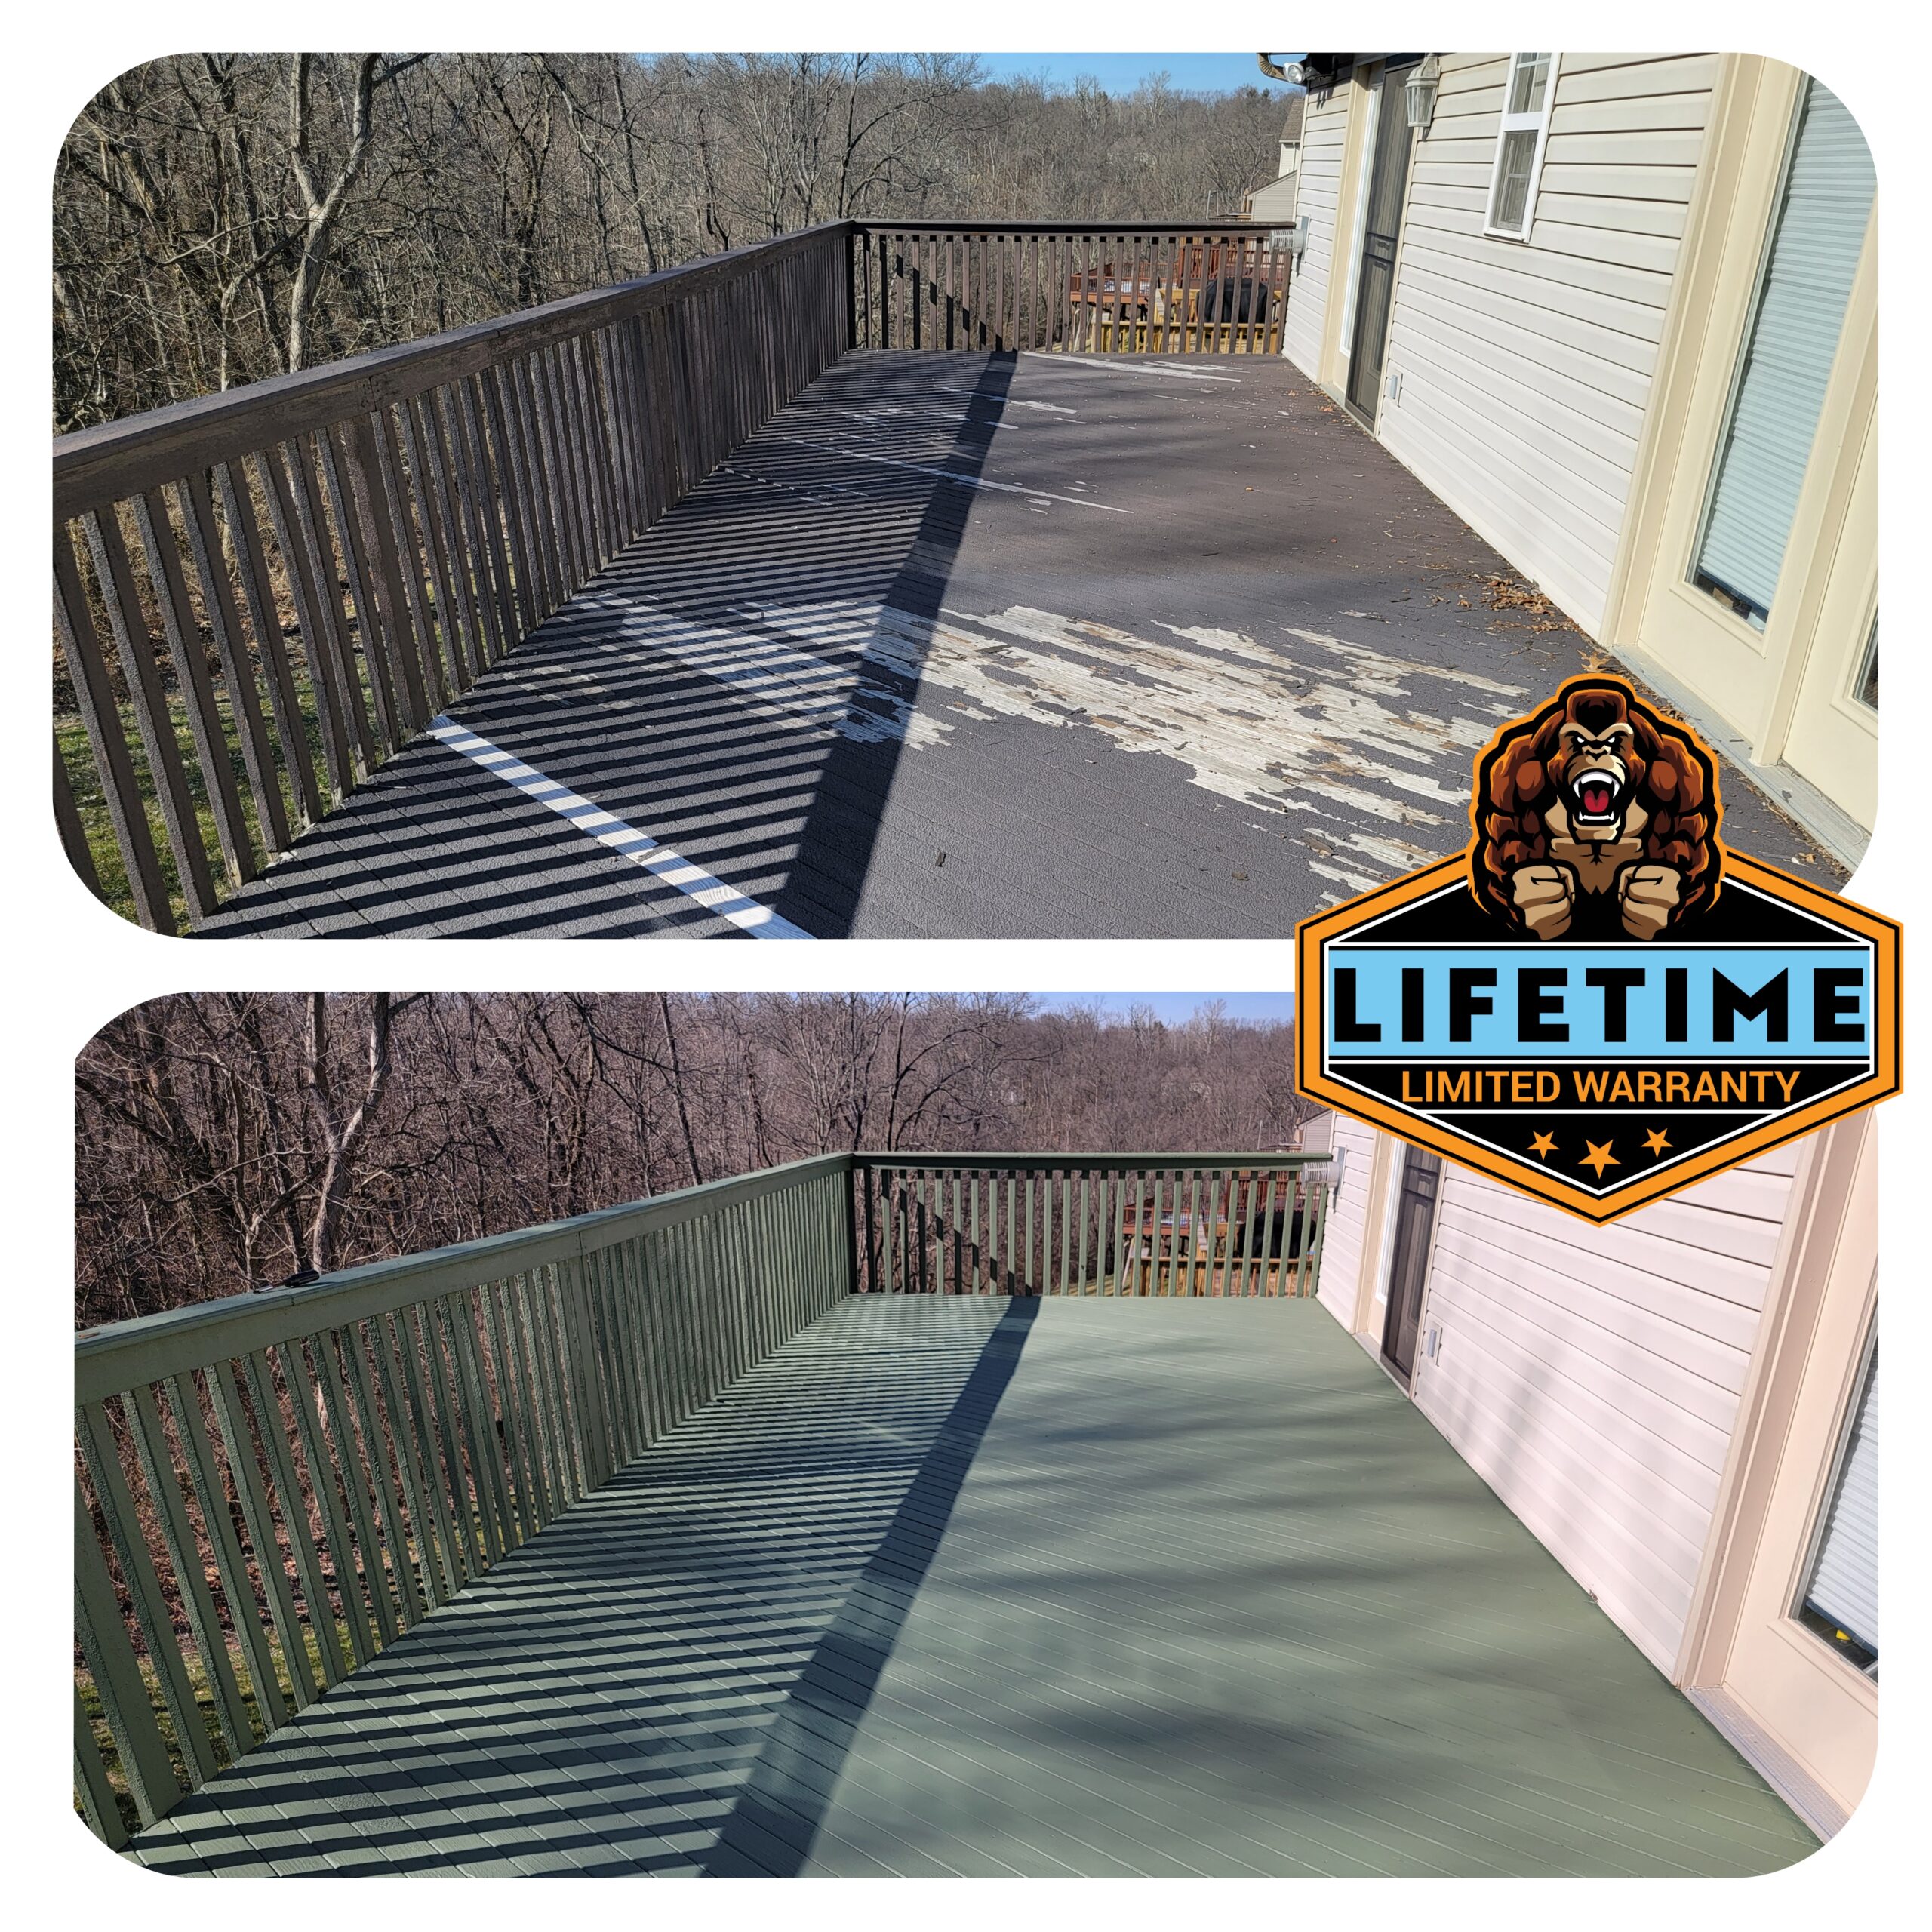 picture demonstrates before and after of a deck armor painting project by Kong Armor in Hebron KY to lockdown peeling deck paint